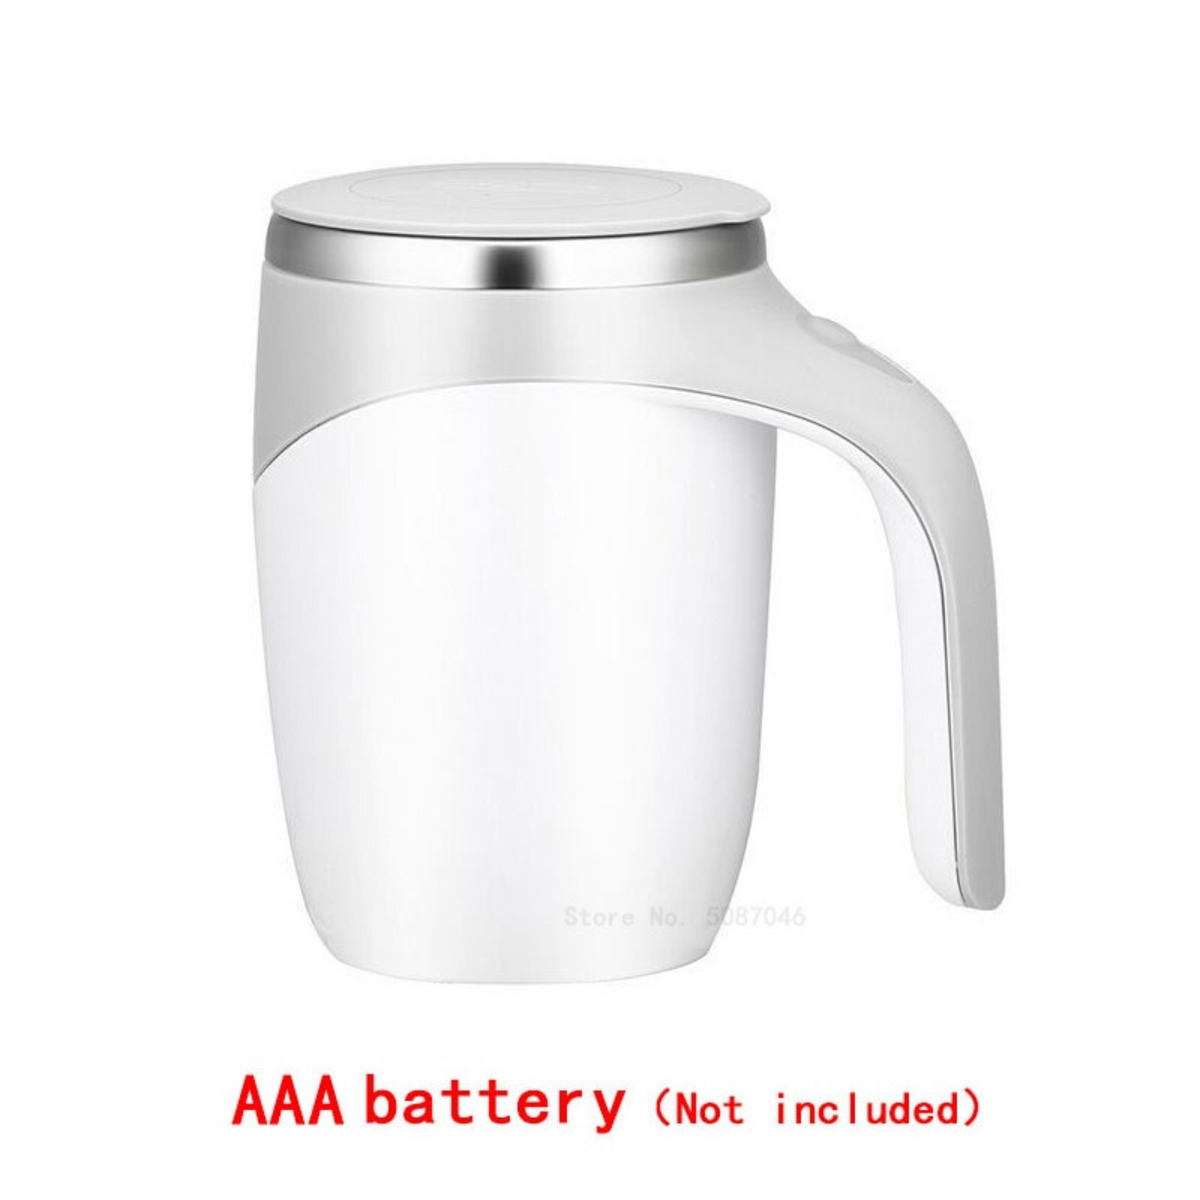 Magnetic Self Stirring Coffee Mug, No Battery, Switch and Spoon, for  Office, Home & Travel